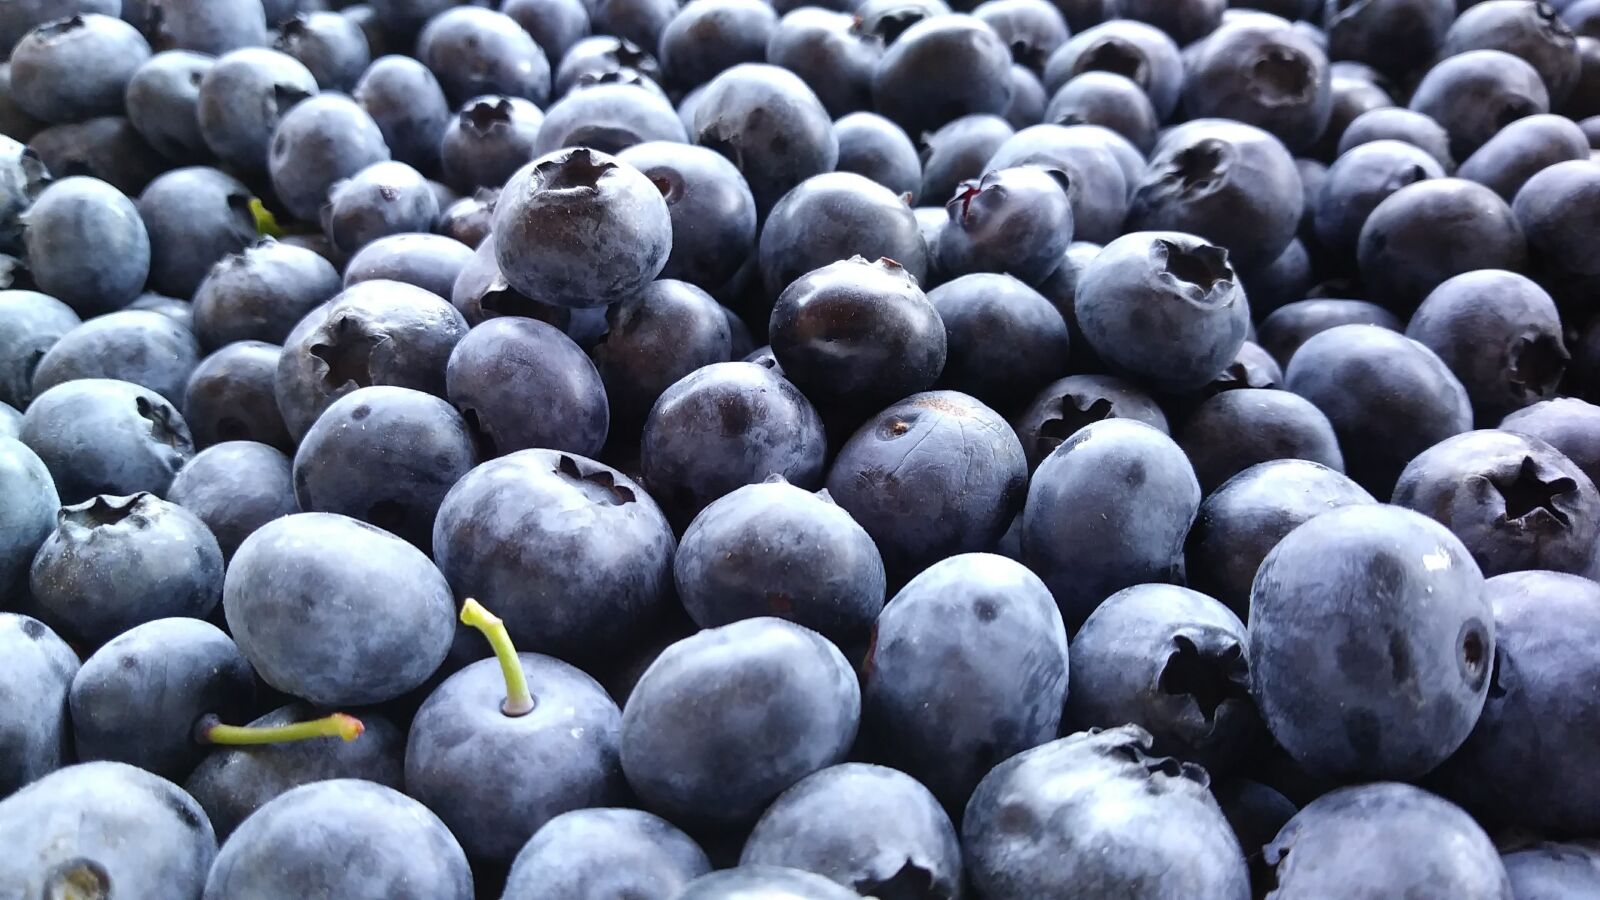 LG X CHARGE sample photo. Blueberries, berries, fruit photography